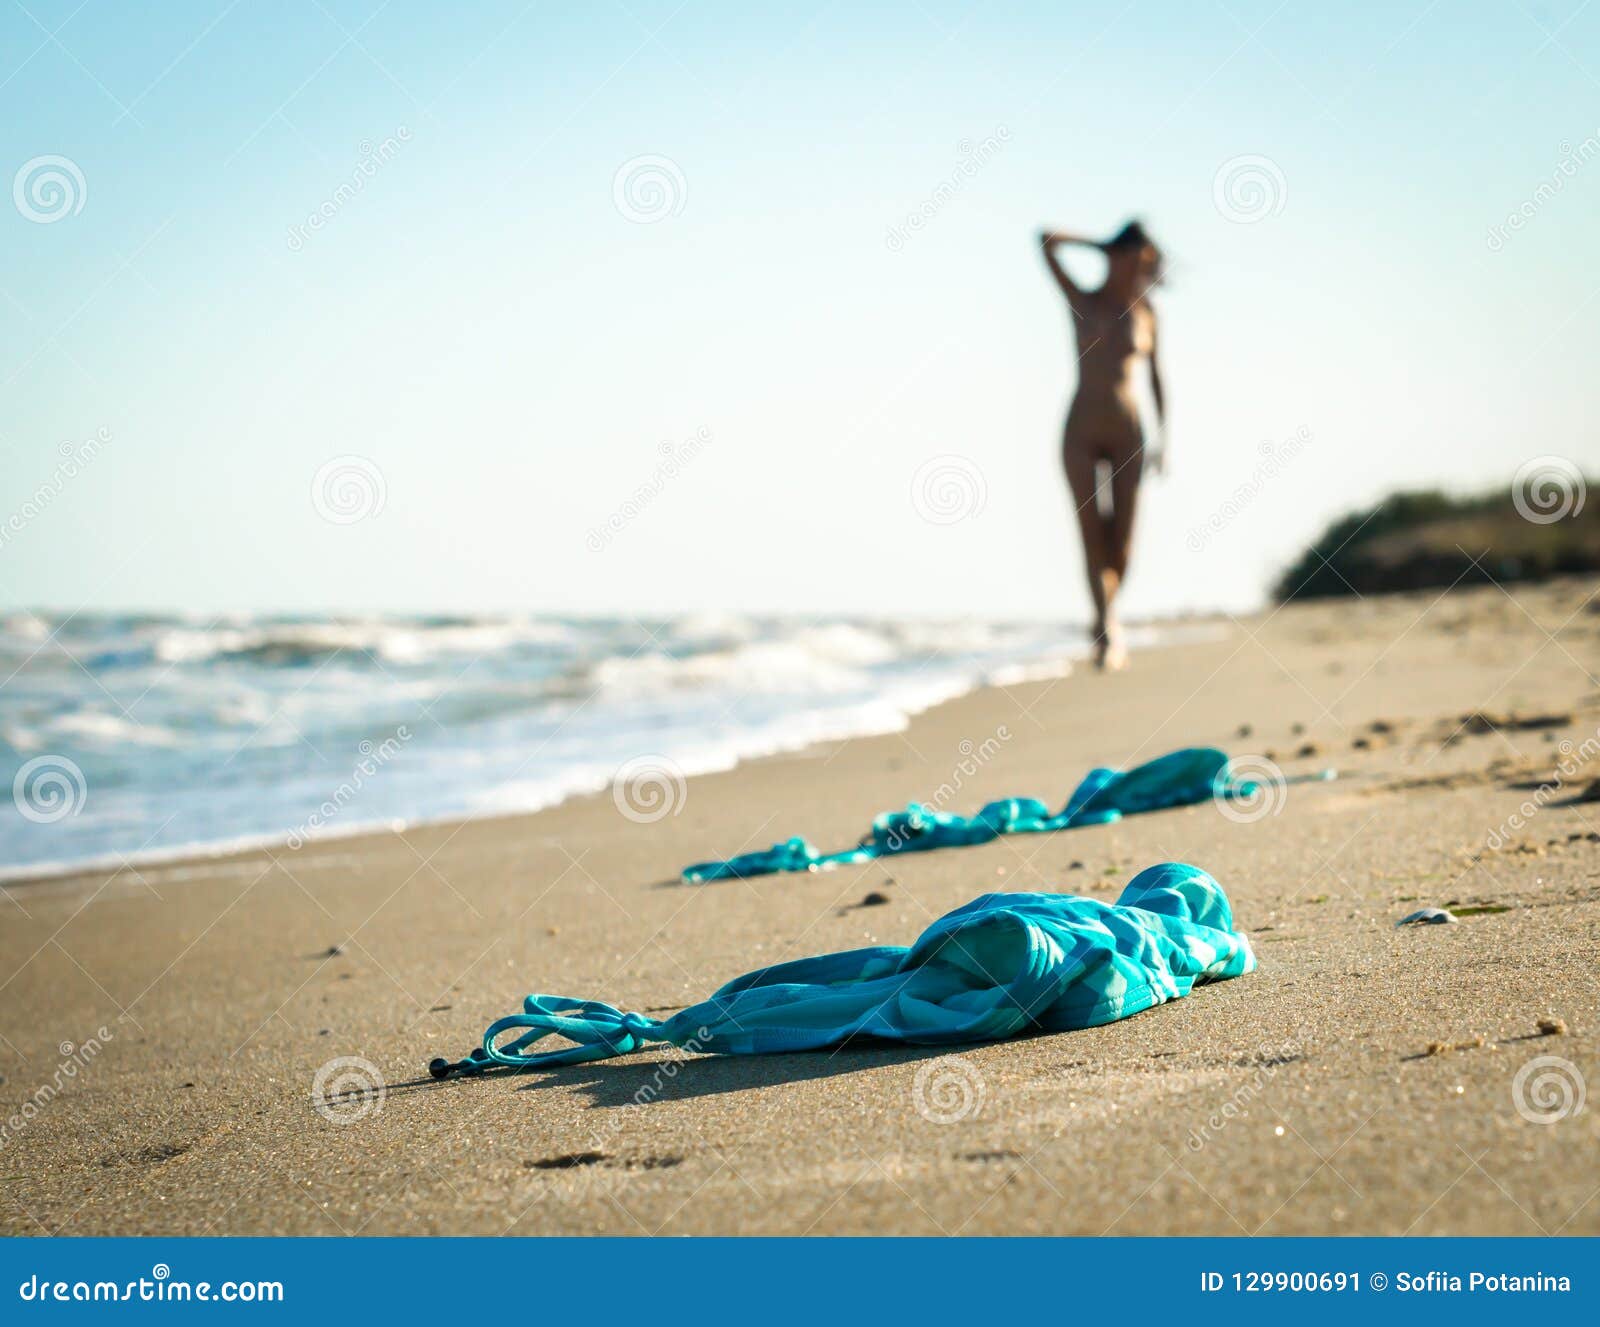 Swimsuit in the Sand on the Beach Near the Sea Surf on the Background of a Naked Female Figure and Blue Sky Stock Image picture